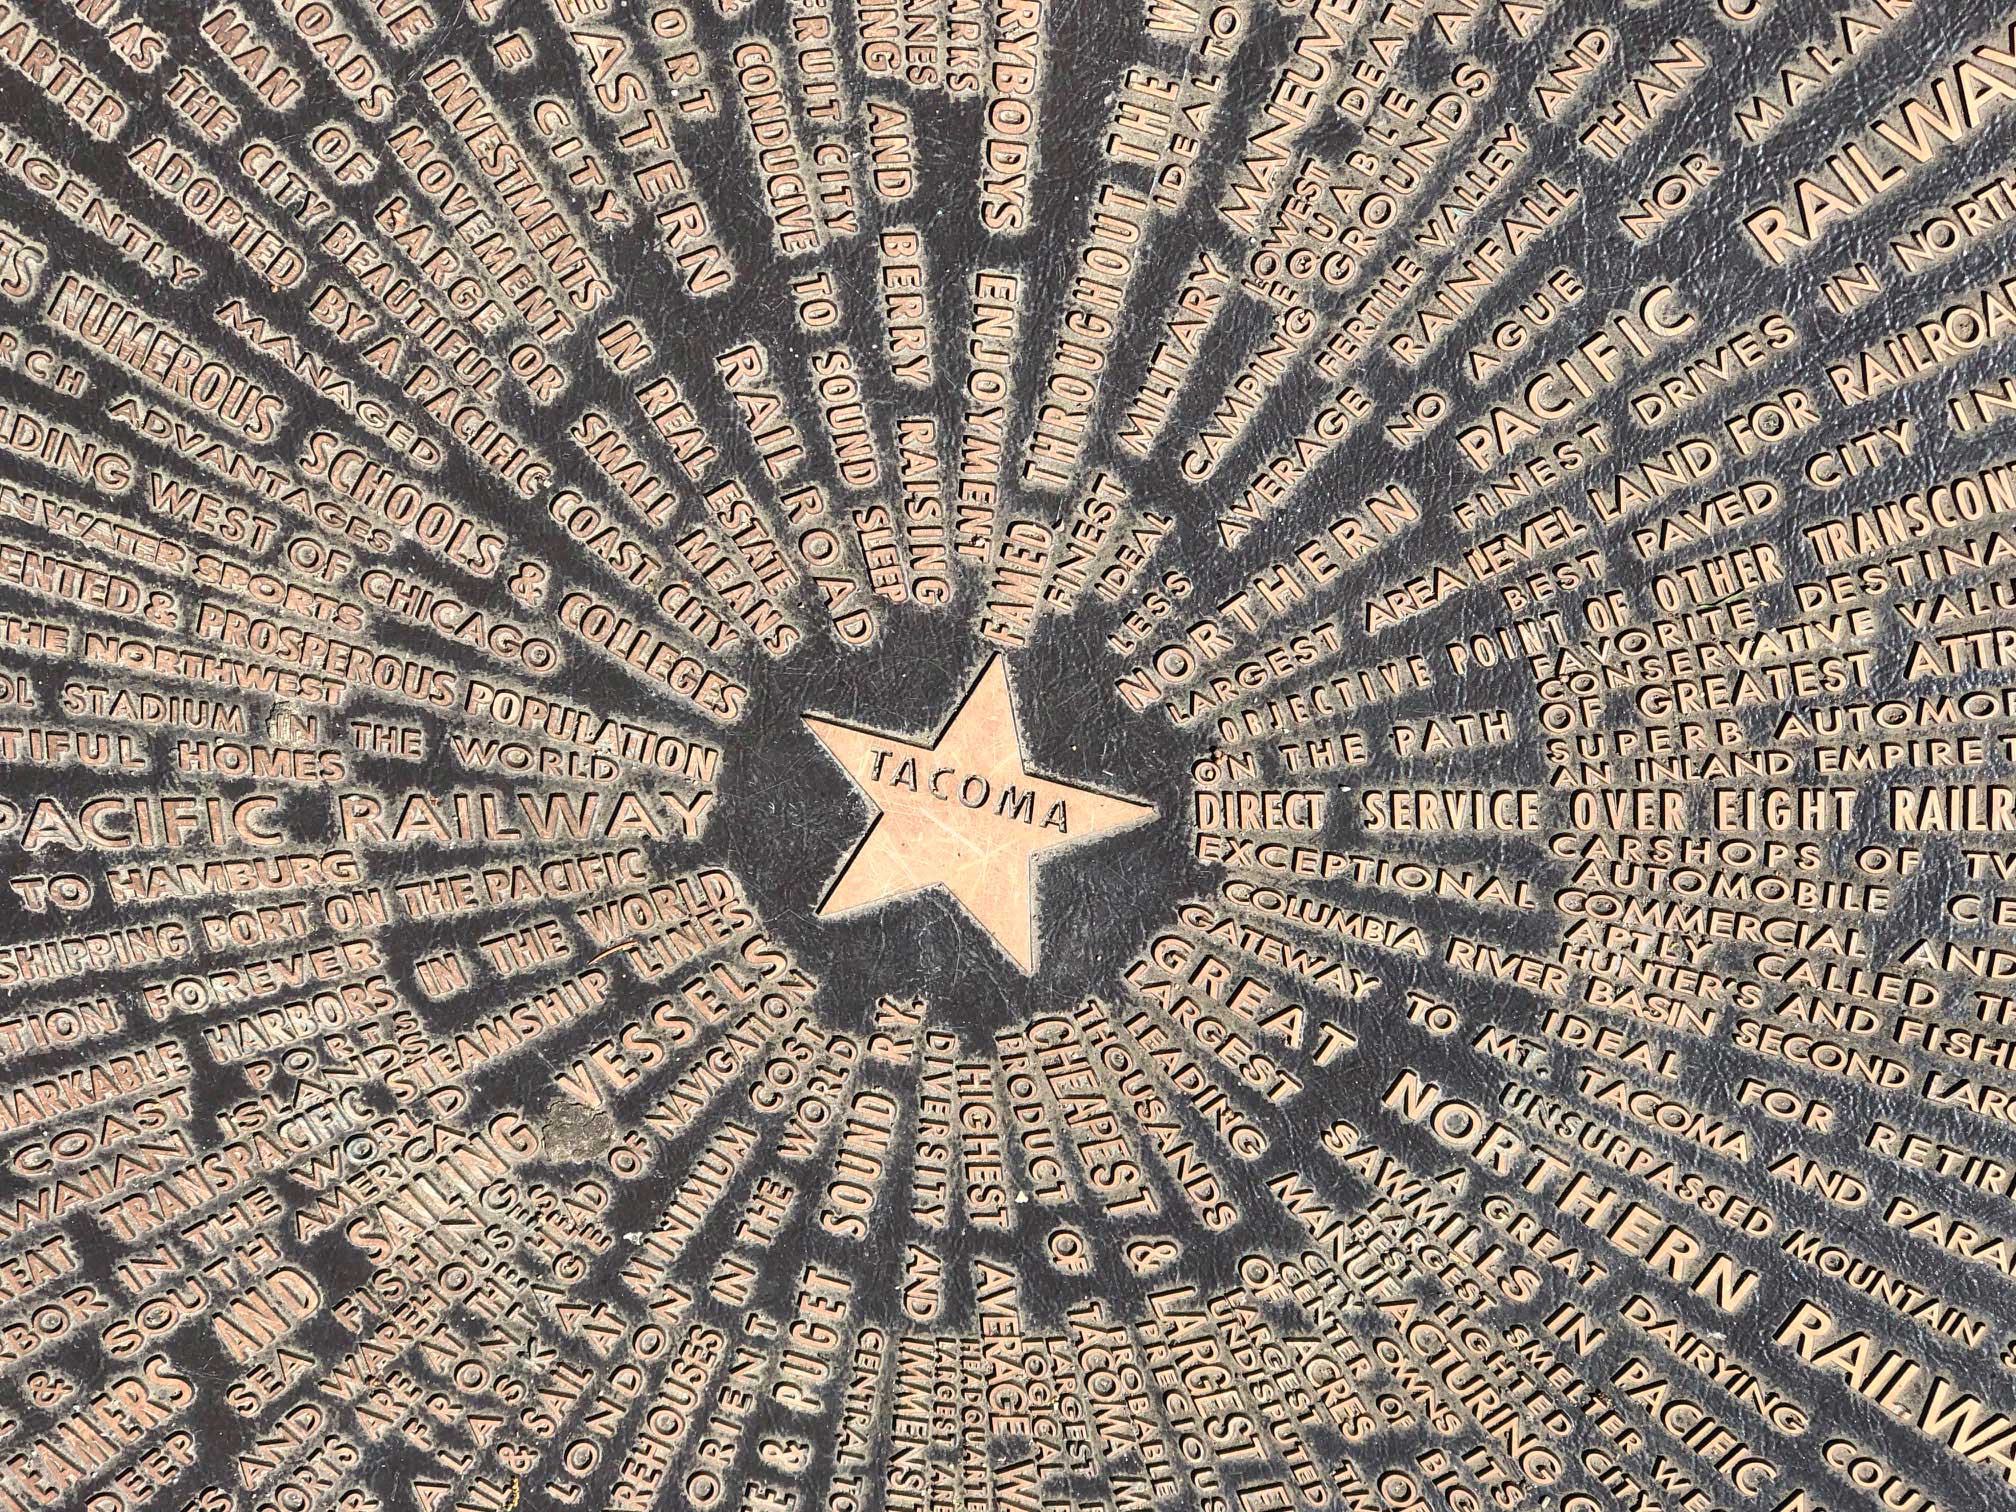 As this "Star of Destiny" by Allen C. Mason (embedded in the sidewalk in the Proctor District) implies, Tacoma is the center of commerce and culture of Pierce County. Thanks to the rails, trails, produce and work of all the surrounding communities, we all prosper. Photo: Morf Morford